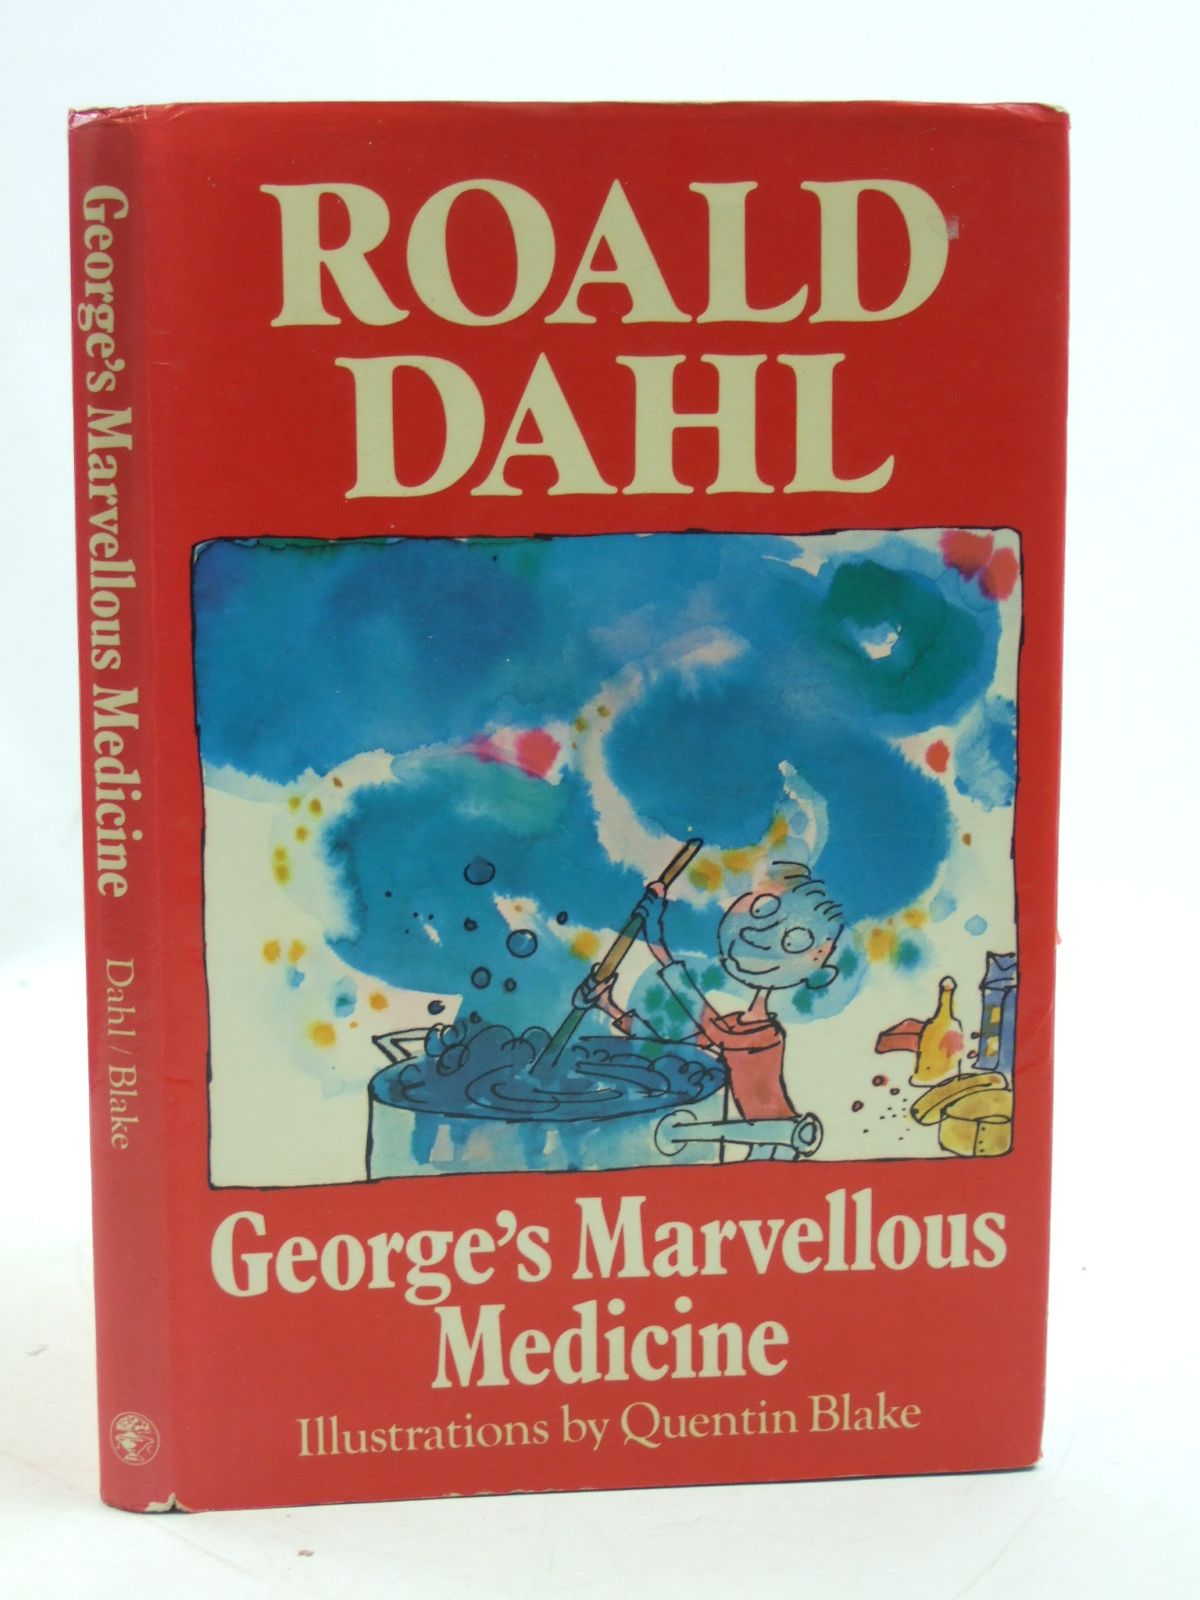 Cover of GEORGE'S MARVELLOUS MEDICINE by Roald Dahl